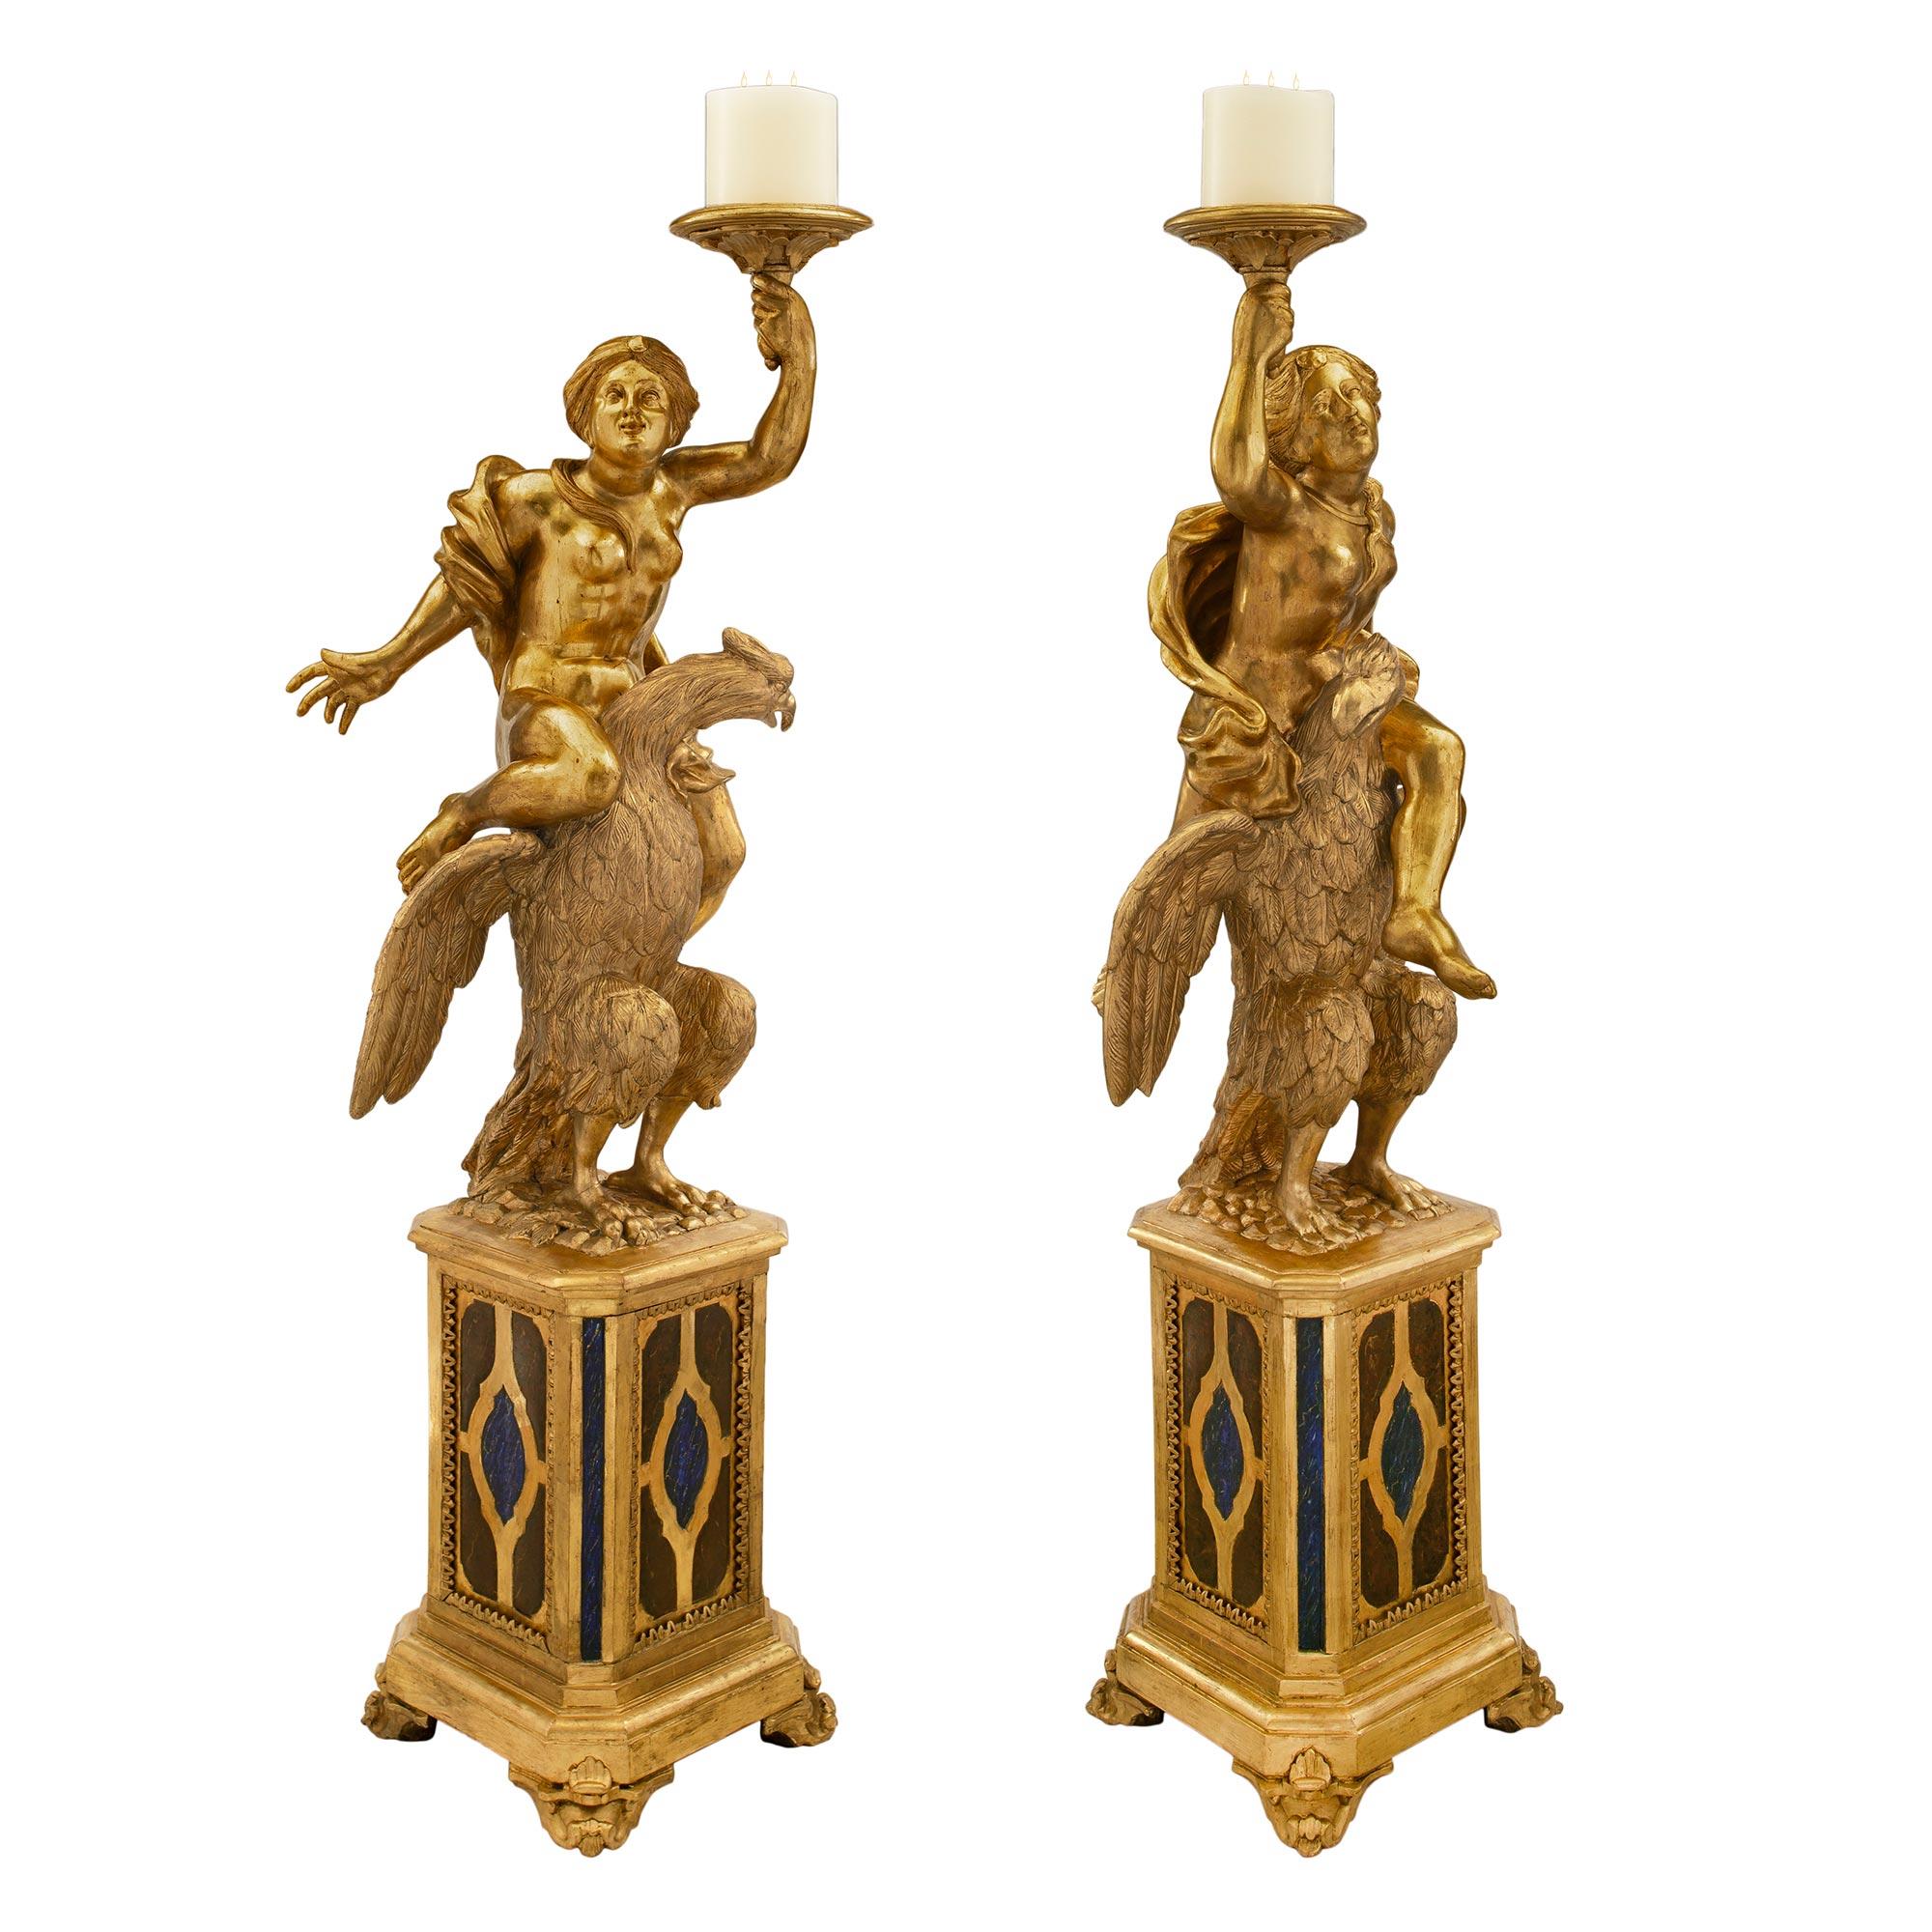 A stunning and large scale true pair of Italian 18th century giltwood and faux painted Baroque Torchières. Each Torchière is raised by a striking pedestal with fine scrolled foliate feet and and octagonal stepped base. Each side displays impressive